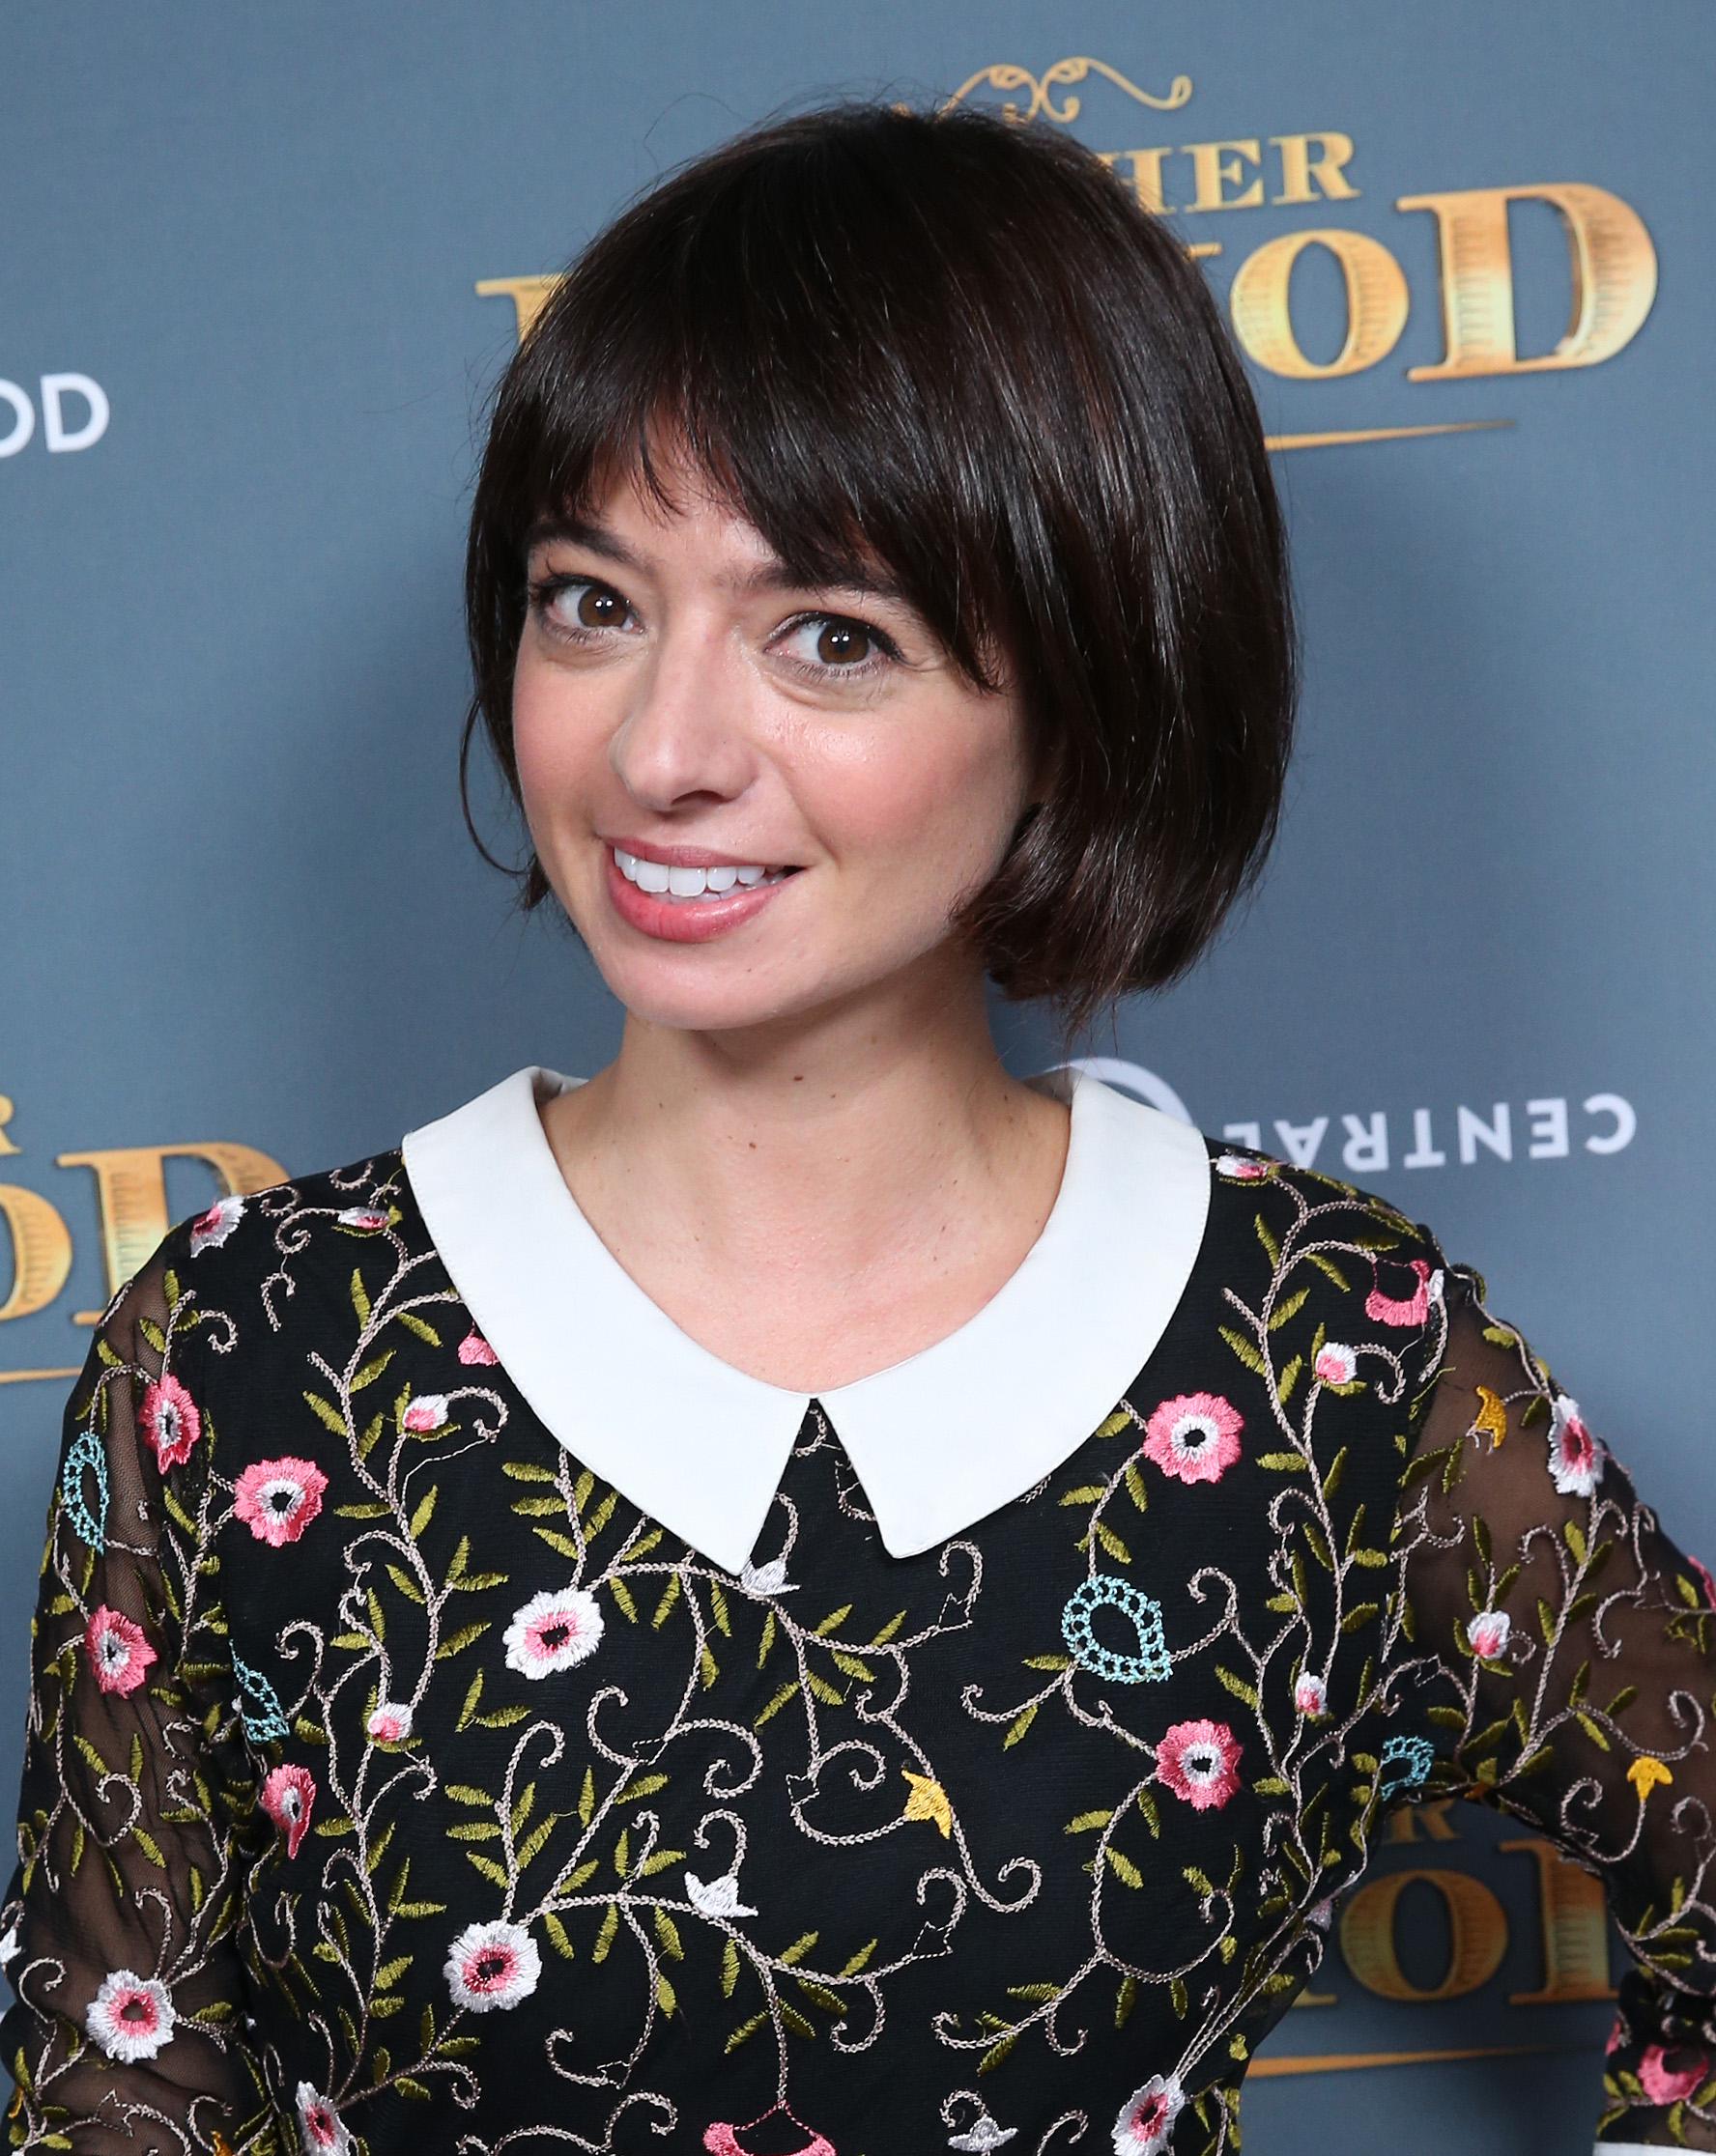 What Garfunkel & Oates' Kate Micucci Be Doing If She Weren't Famous